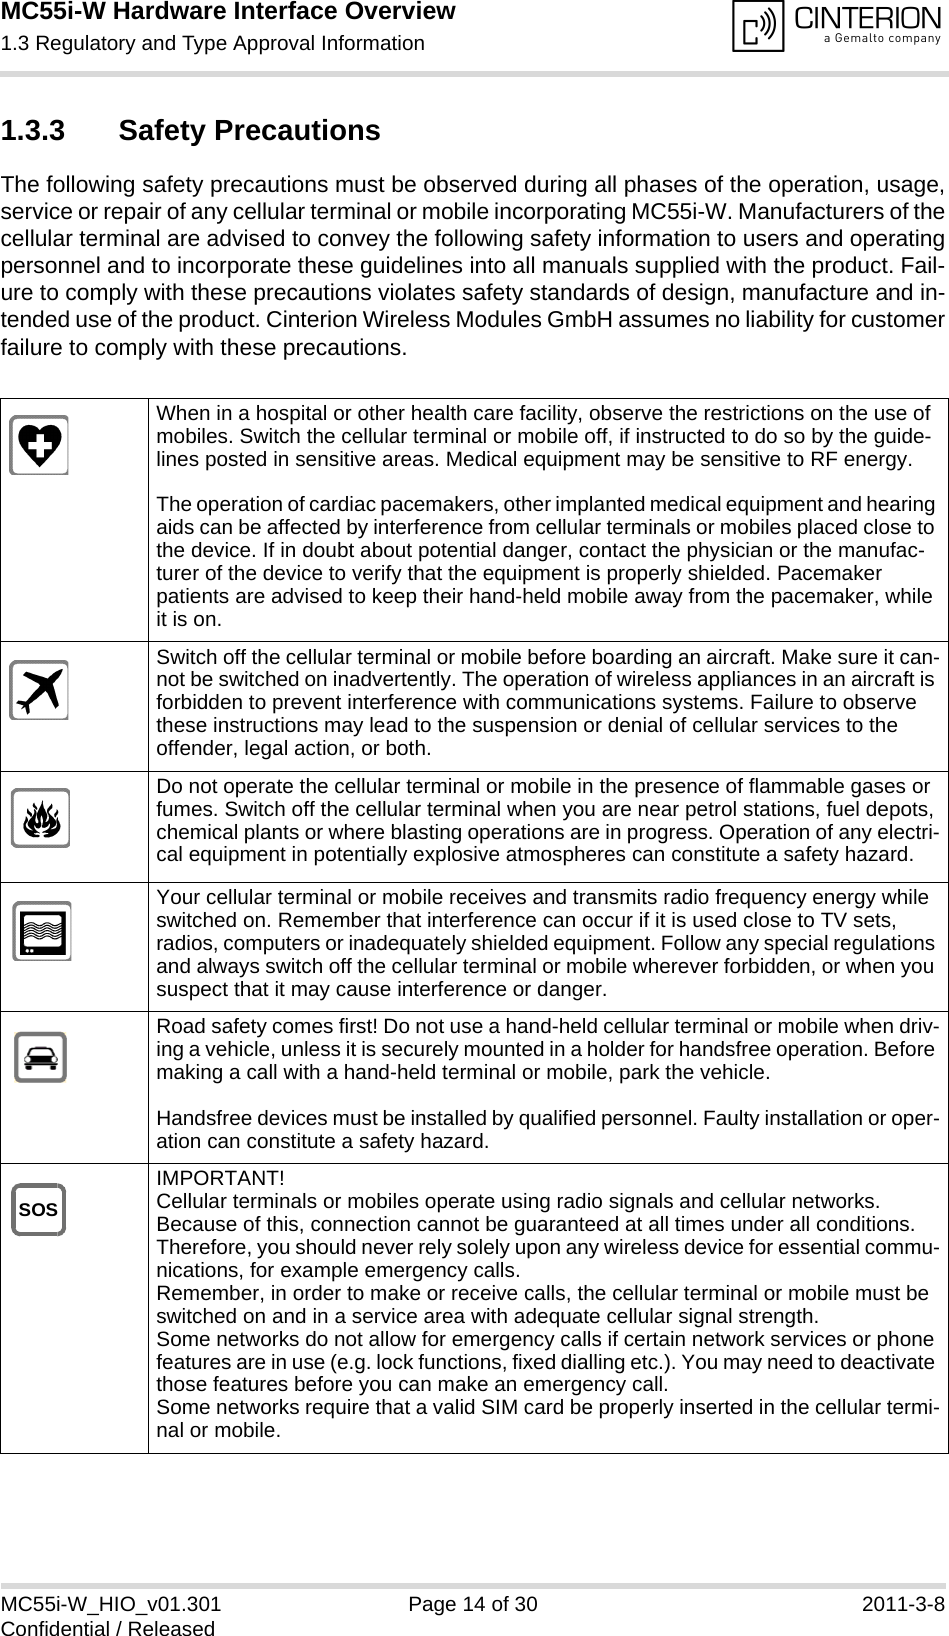 MC55i-W Hardware Interface Overview1.3 Regulatory and Type Approval Information14MC55i-W_HIO_v01.301 Page 14 of 30 2011-3-8Confidential / Released1.3.3 Safety PrecautionsThe following safety precautions must be observed during all phases of the operation, usage,service or repair of any cellular terminal or mobile incorporating MC55i-W. Manufacturers of thecellular terminal are advised to convey the following safety information to users and operatingpersonnel and to incorporate these guidelines into all manuals supplied with the product. Fail-ure to comply with these precautions violates safety standards of design, manufacture and in-tended use of the product. Cinterion Wireless Modules GmbH assumes no liability for customerfailure to comply with these precautions.When in a hospital or other health care facility, observe the restrictions on the use of mobiles. Switch the cellular terminal or mobile off, if instructed to do so by the guide-lines posted in sensitive areas. Medical equipment may be sensitive to RF energy. The operation of cardiac pacemakers, other implanted medical equipment and hearing aids can be affected by interference from cellular terminals or mobiles placed close to the device. If in doubt about potential danger, contact the physician or the manufac-turer of the device to verify that the equipment is properly shielded. Pacemaker patients are advised to keep their hand-held mobile away from the pacemaker, while it is on. Switch off the cellular terminal or mobile before boarding an aircraft. Make sure it can-not be switched on inadvertently. The operation of wireless appliances in an aircraft is forbidden to prevent interference with communications systems. Failure to observe these instructions may lead to the suspension or denial of cellular services to the offender, legal action, or both.Do not operate the cellular terminal or mobile in the presence of flammable gases or fumes. Switch off the cellular terminal when you are near petrol stations, fuel depots, chemical plants or where blasting operations are in progress. Operation of any electri-cal equipment in potentially explosive atmospheres can constitute a safety hazard.Your cellular terminal or mobile receives and transmits radio frequency energy while switched on. Remember that interference can occur if it is used close to TV sets, radios, computers or inadequately shielded equipment. Follow any special regulations and always switch off the cellular terminal or mobile wherever forbidden, or when you suspect that it may cause interference or danger.Road safety comes first! Do not use a hand-held cellular terminal or mobile when driv-ing a vehicle, unless it is securely mounted in a holder for handsfree operation. Before making a call with a hand-held terminal or mobile, park the vehicle. Handsfree devices must be installed by qualified personnel. Faulty installation or oper-ation can constitute a safety hazard.IMPORTANT!Cellular terminals or mobiles operate using radio signals and cellular networks. Because of this, connection cannot be guaranteed at all times under all conditions. Therefore, you should never rely solely upon any wireless device for essential commu-nications, for example emergency calls. Remember, in order to make or receive calls, the cellular terminal or mobile must be switched on and in a service area with adequate cellular signal strength. Some networks do not allow for emergency calls if certain network services or phone features are in use (e.g. lock functions, fixed dialling etc.). You may need to deactivate those features before you can make an emergency call.Some networks require that a valid SIM card be properly inserted in the cellular termi-nal or mobile. SOS